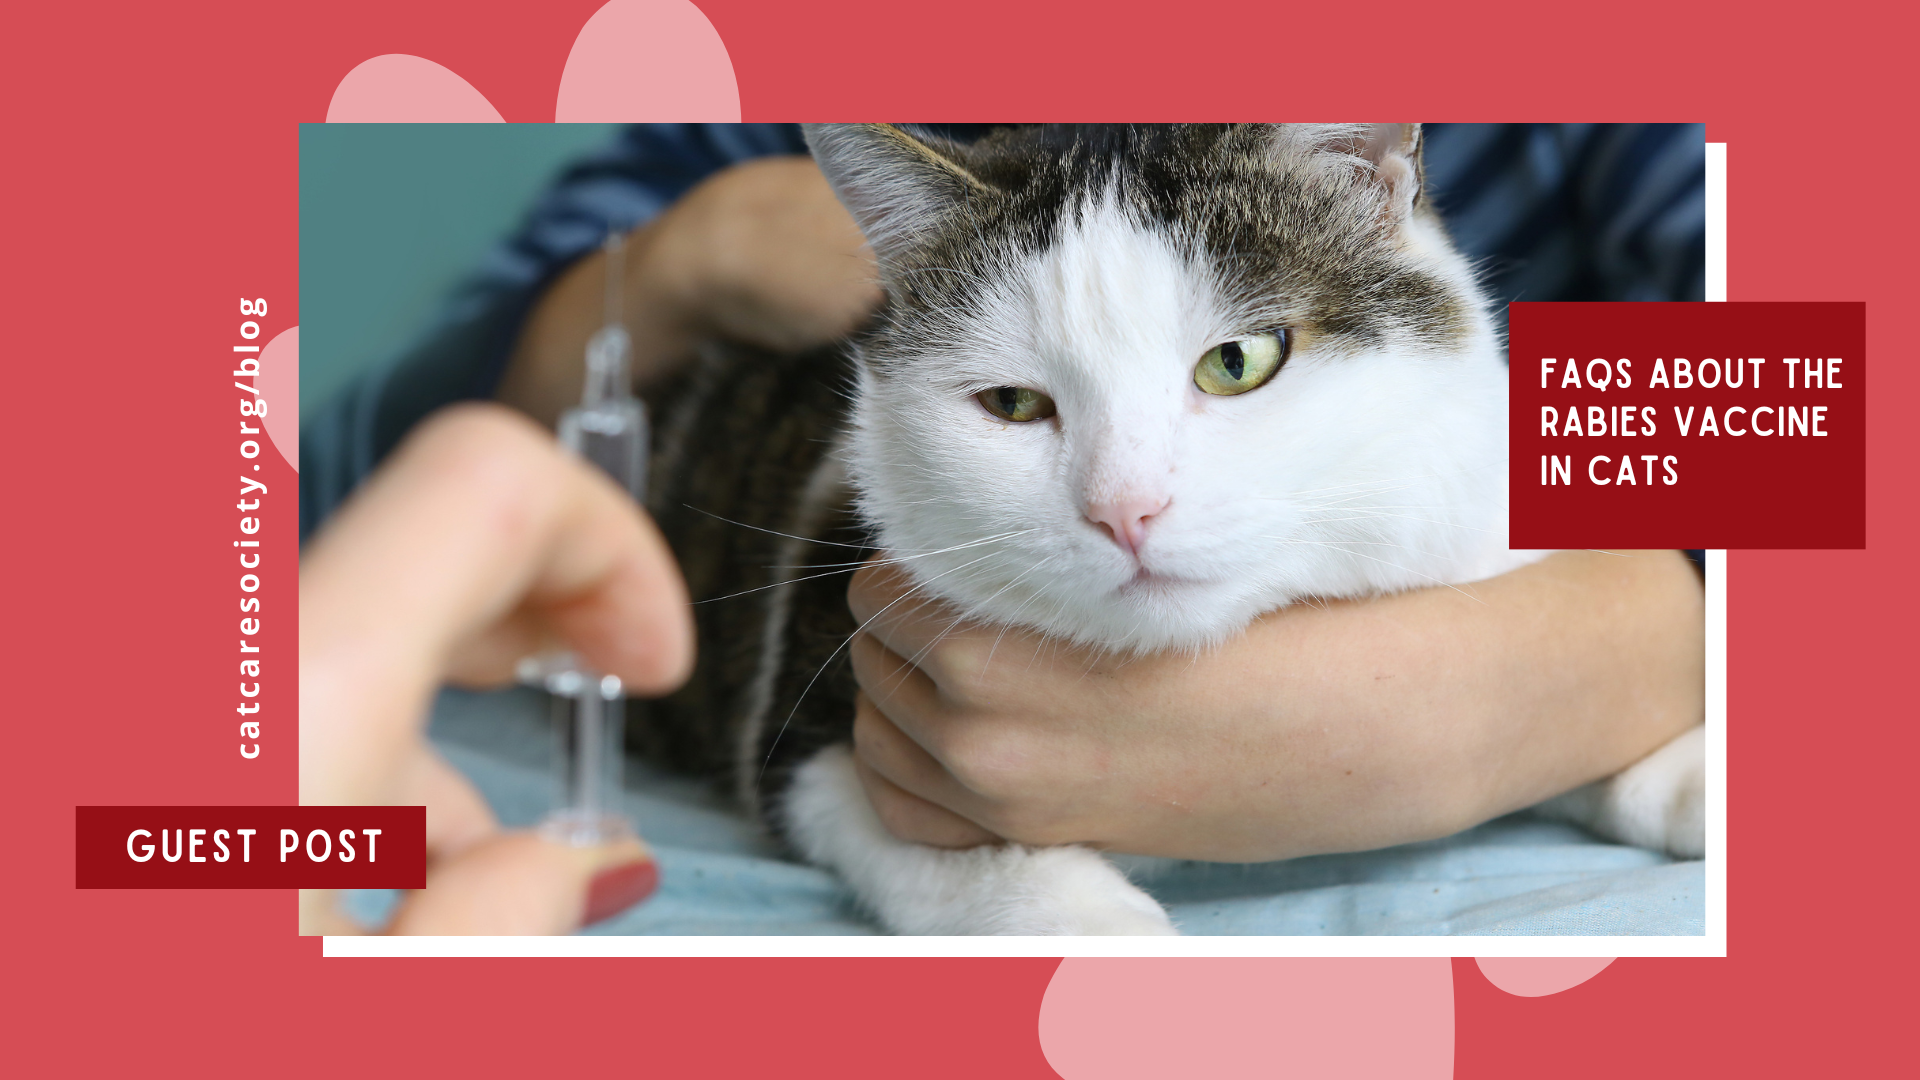 The Rabies Vaccine for Cats: Frequently Asked Questions (FAQs)